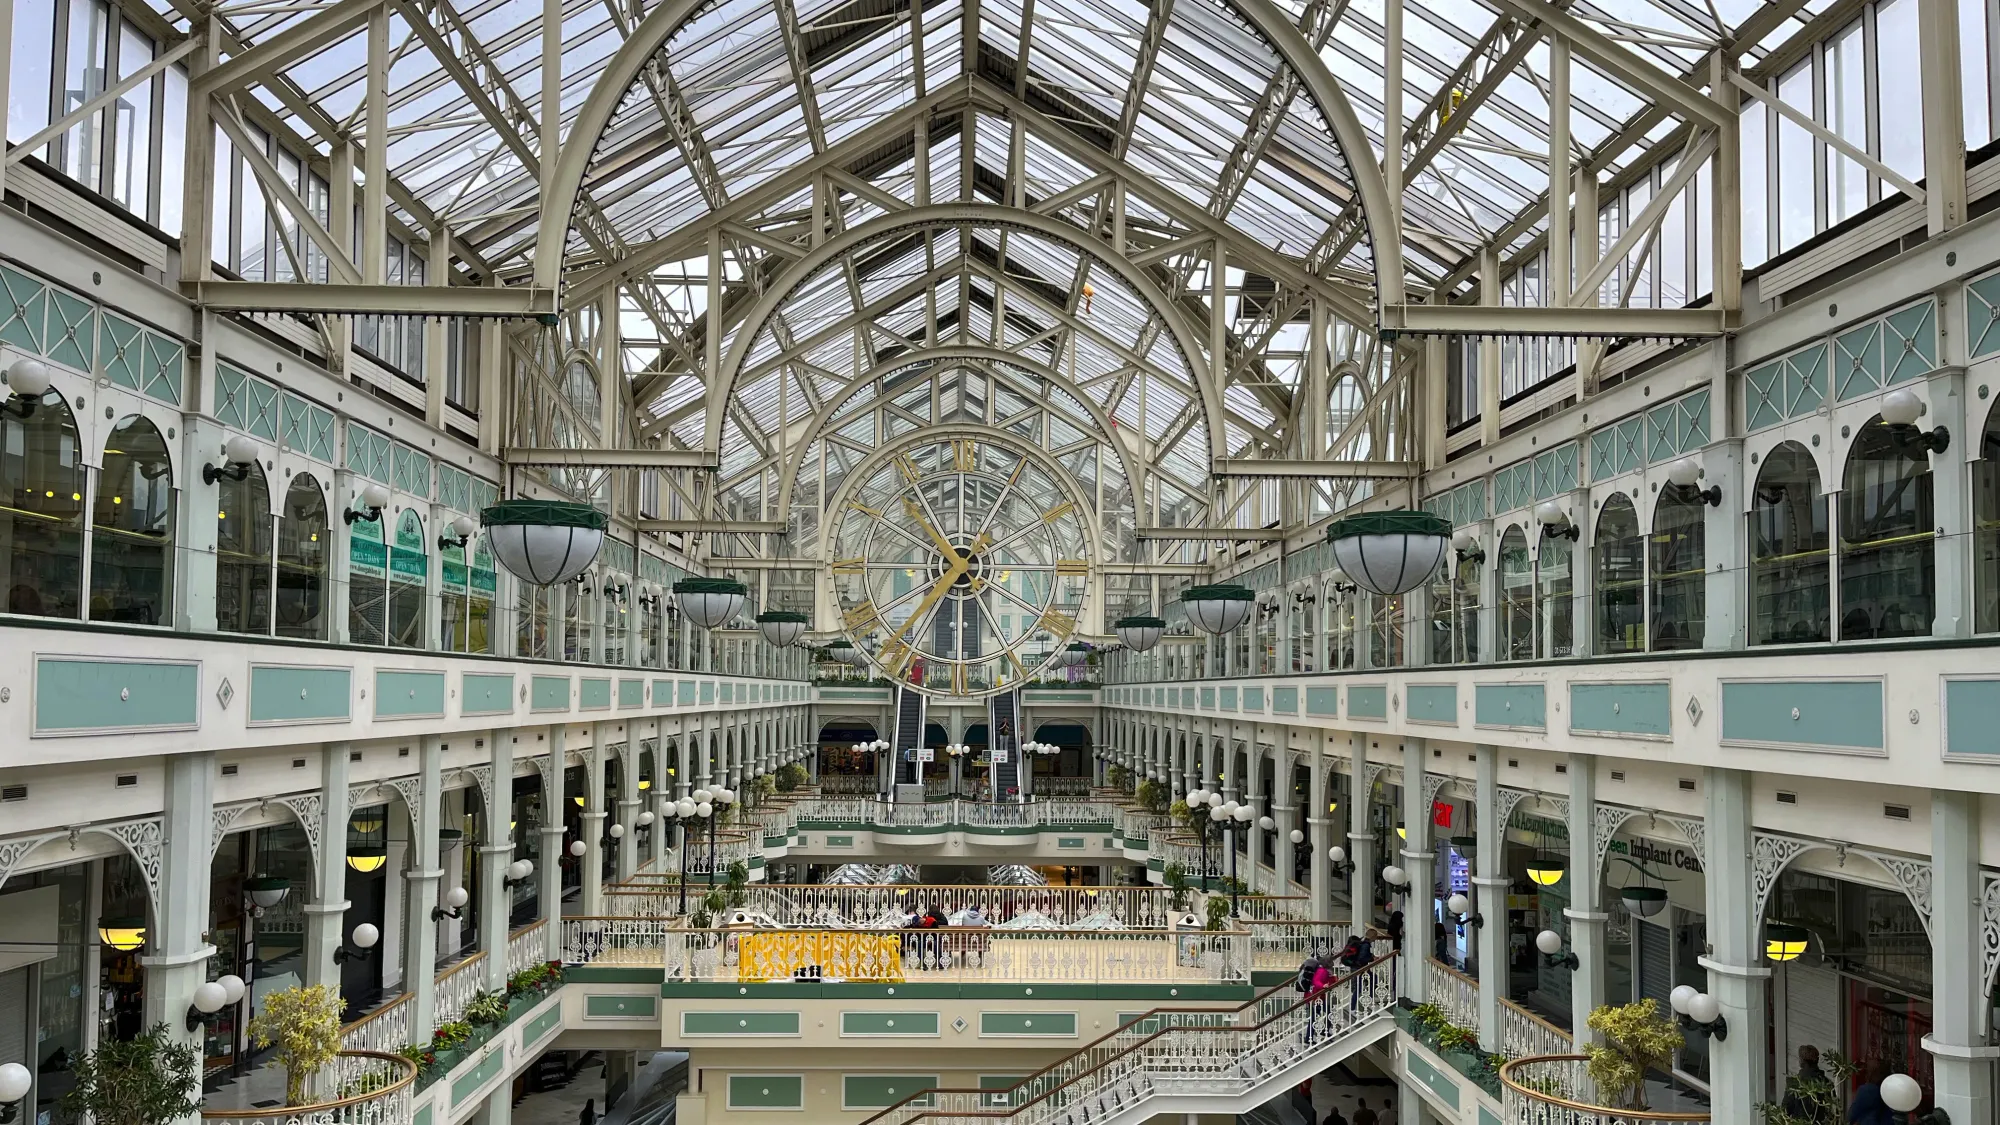 Glass ceiling with arches in a shopping center